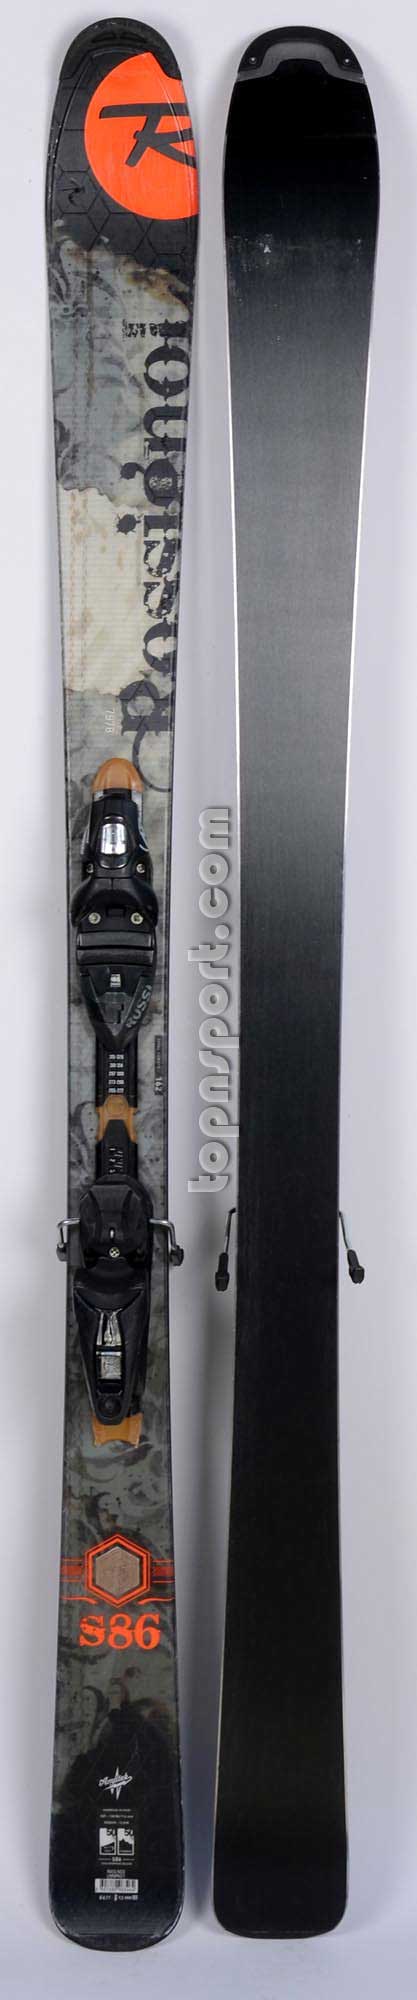 Rossignol BANDIT S86 - Skis d'occasion